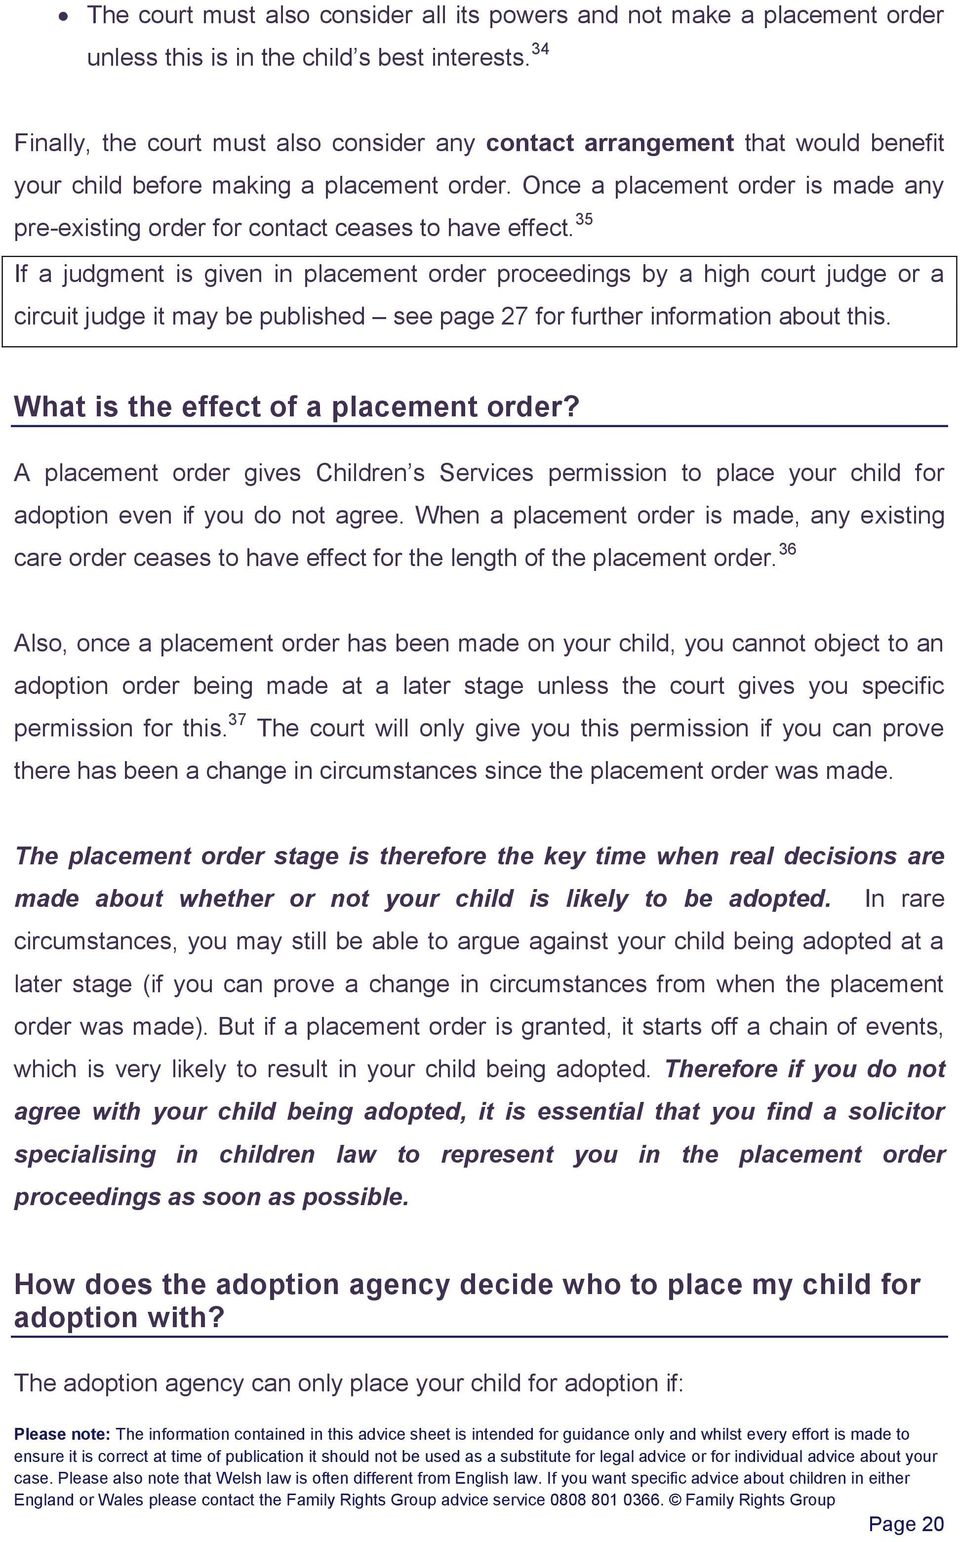 Once a placement order is made any pre-existing order for contact ceases to have effect.